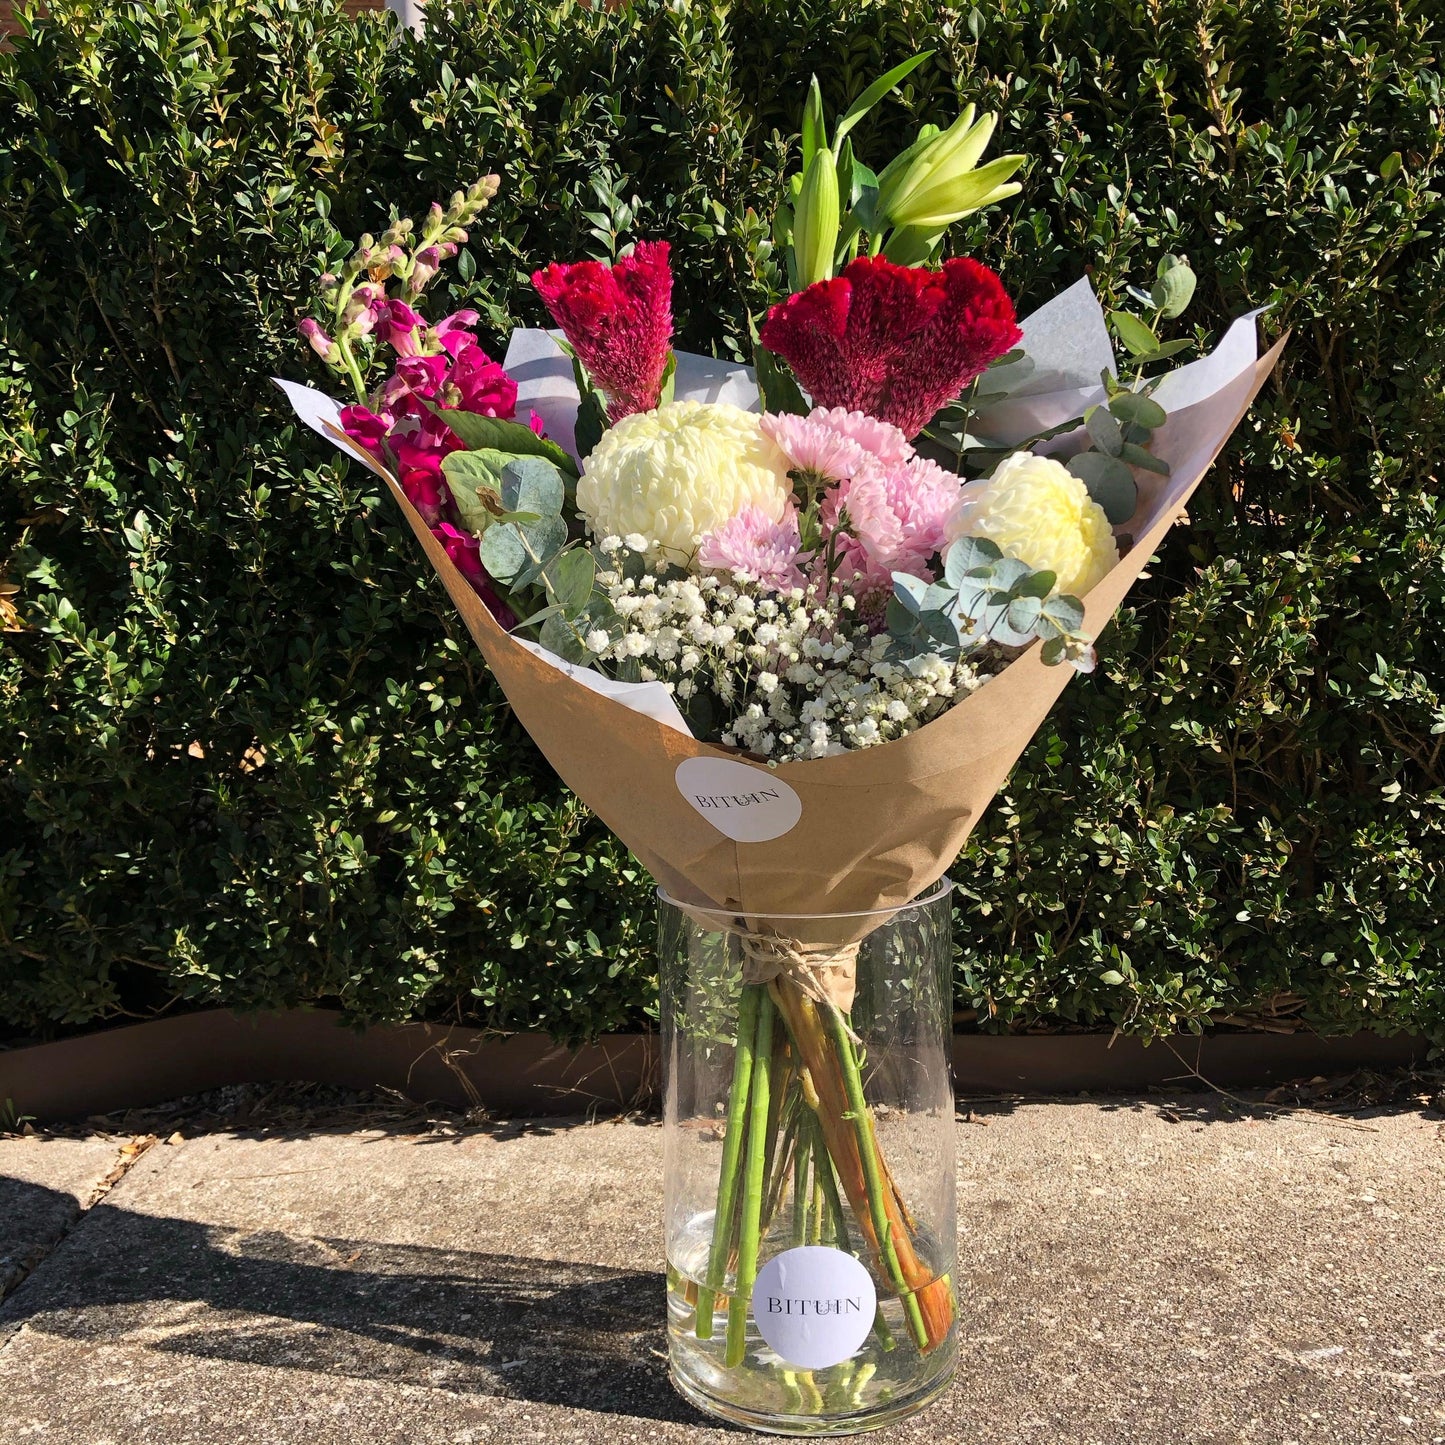 Bright Blossom Blooming | Medium Bespoke Flowers - Bituin Melbourne Flower Delivery - Sustainable florist